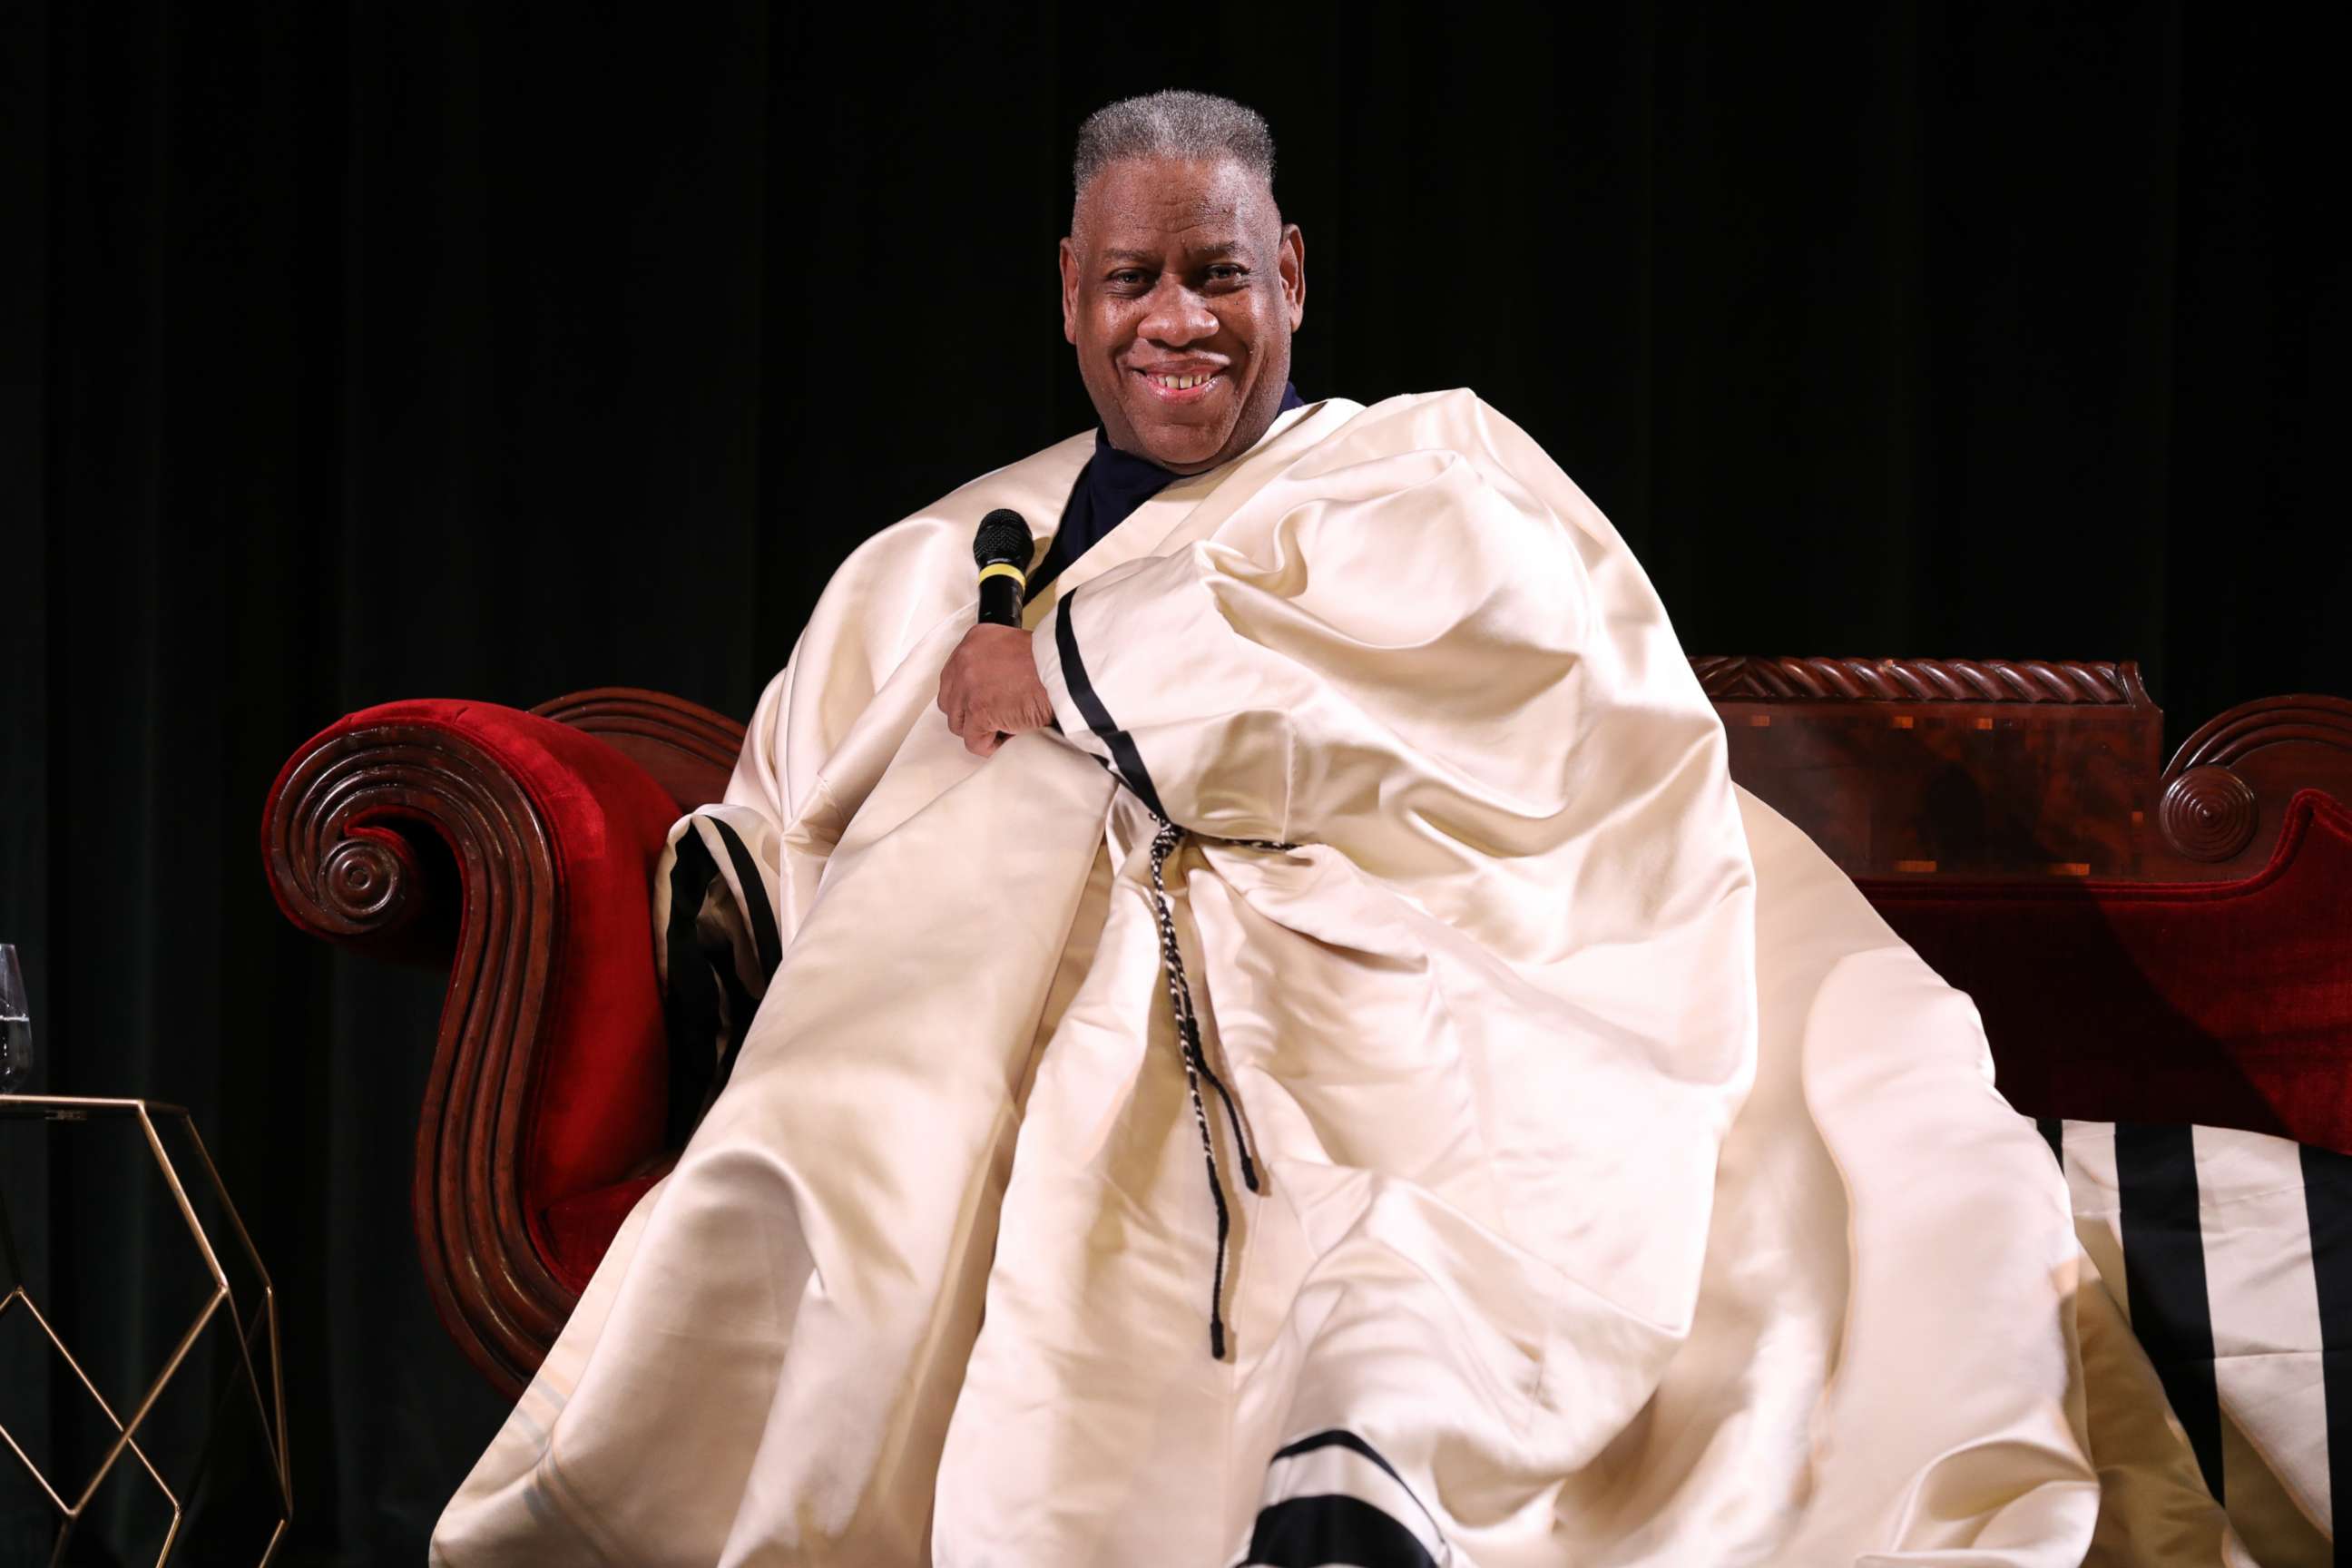 PHOTO: Andre Leon Talley speaks during "The Gospel According to Andre" Q&A during the 21st SCAD Savannah Film Festival on Nov. 2, 2018, in Savannah, Ga.